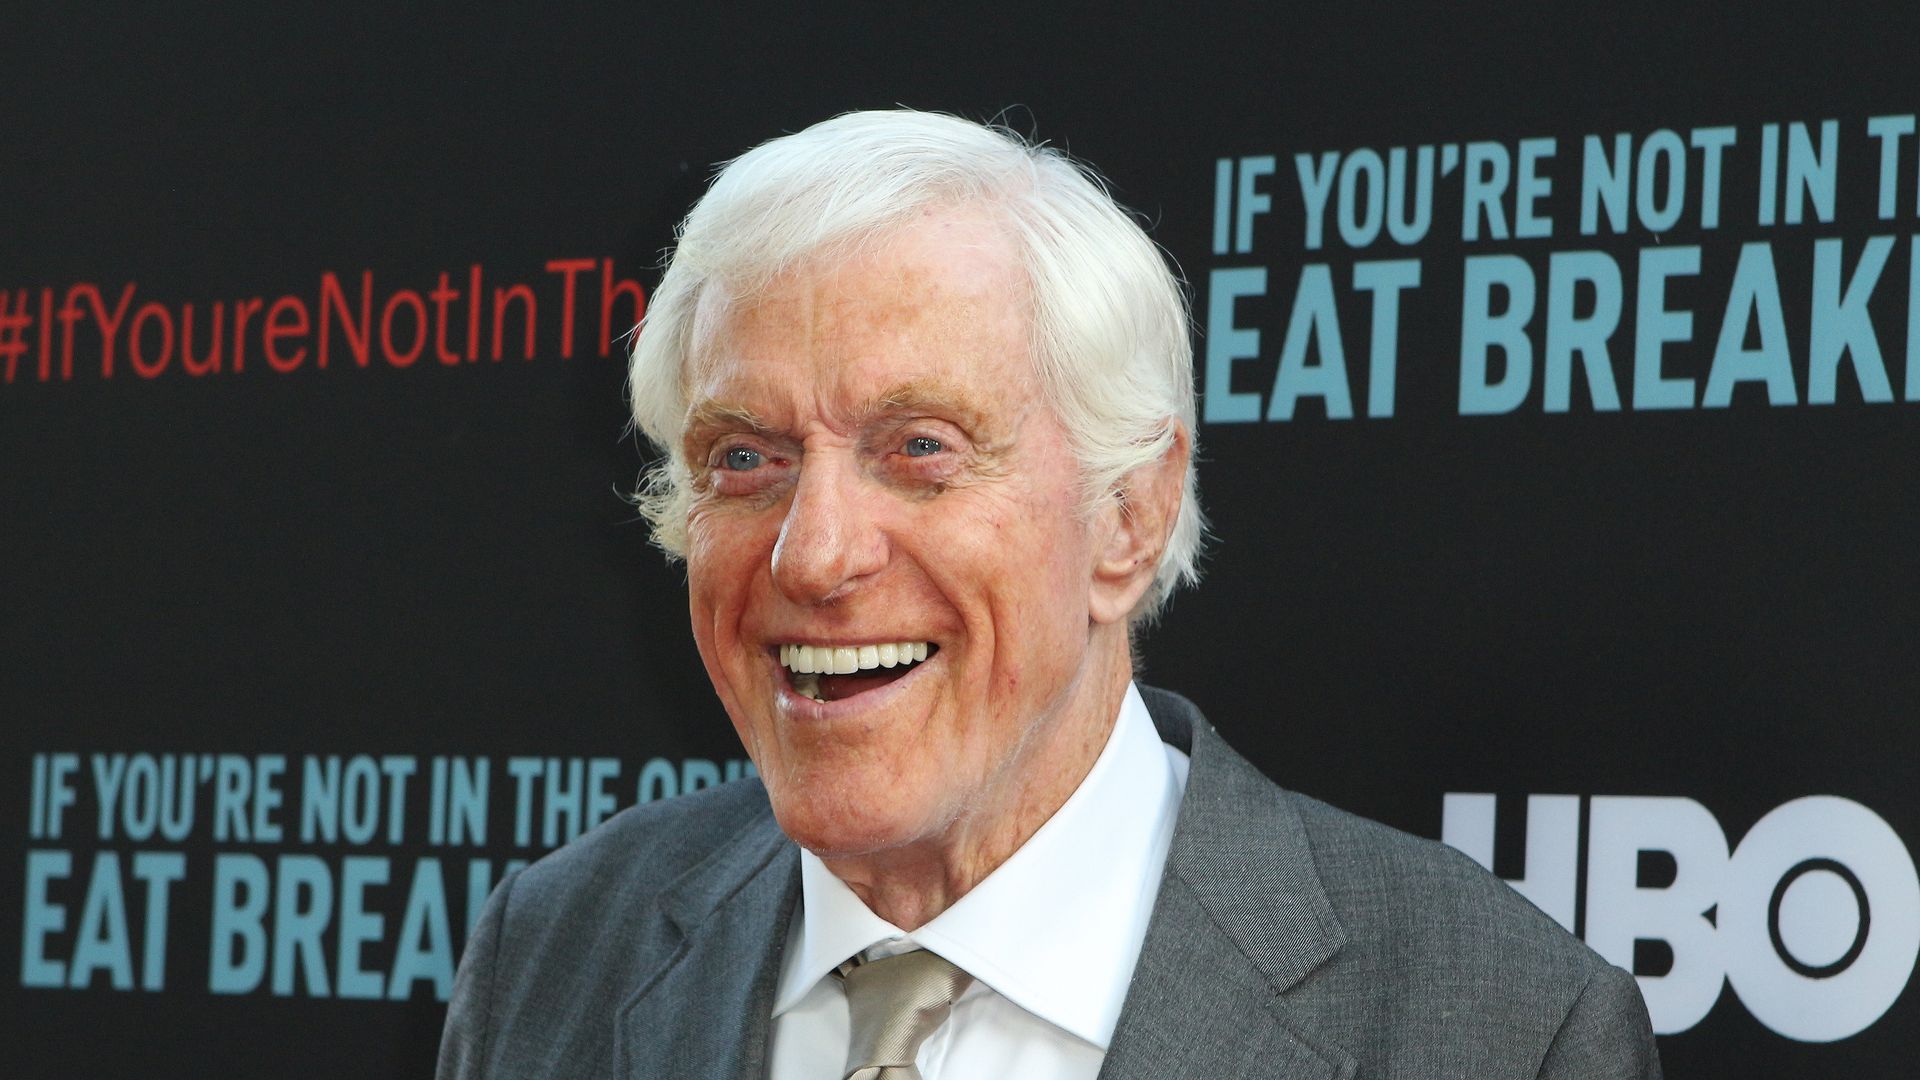 Actor Dick Van Dyke attends the premiere of HBO's "If You're Not In The Obit, Eat Breakfast" at Samuel Goldwyn Theater on May 17, 2017 in Beverly Hills, California.